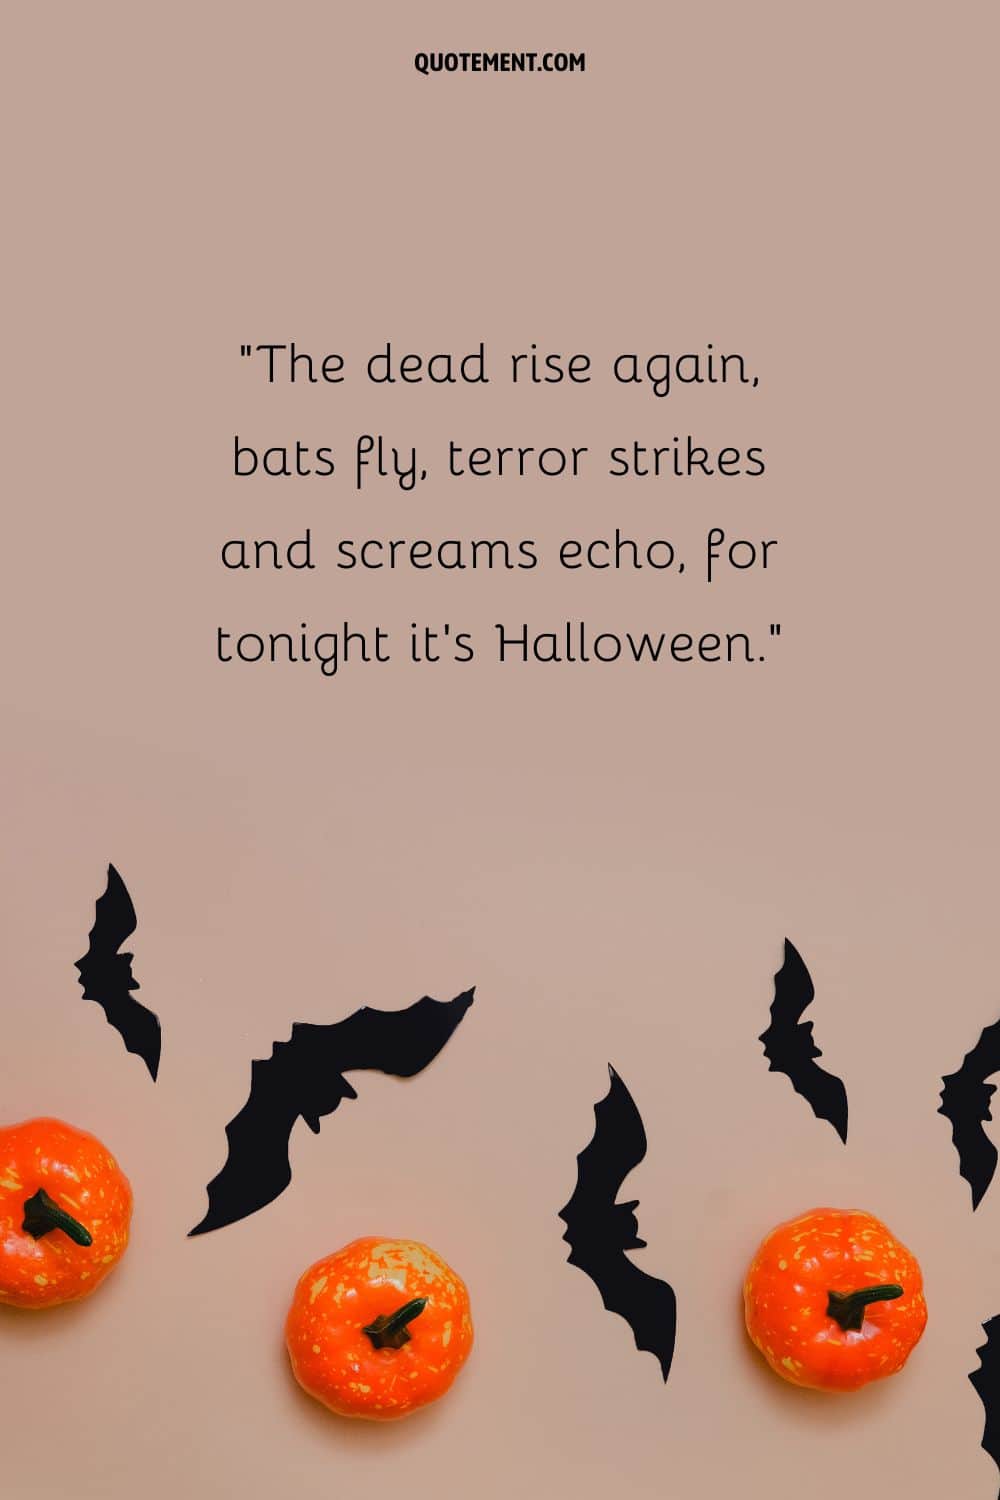 The dead rise again, bats fly, terror strikes and screams echo, for tonight it's Halloween